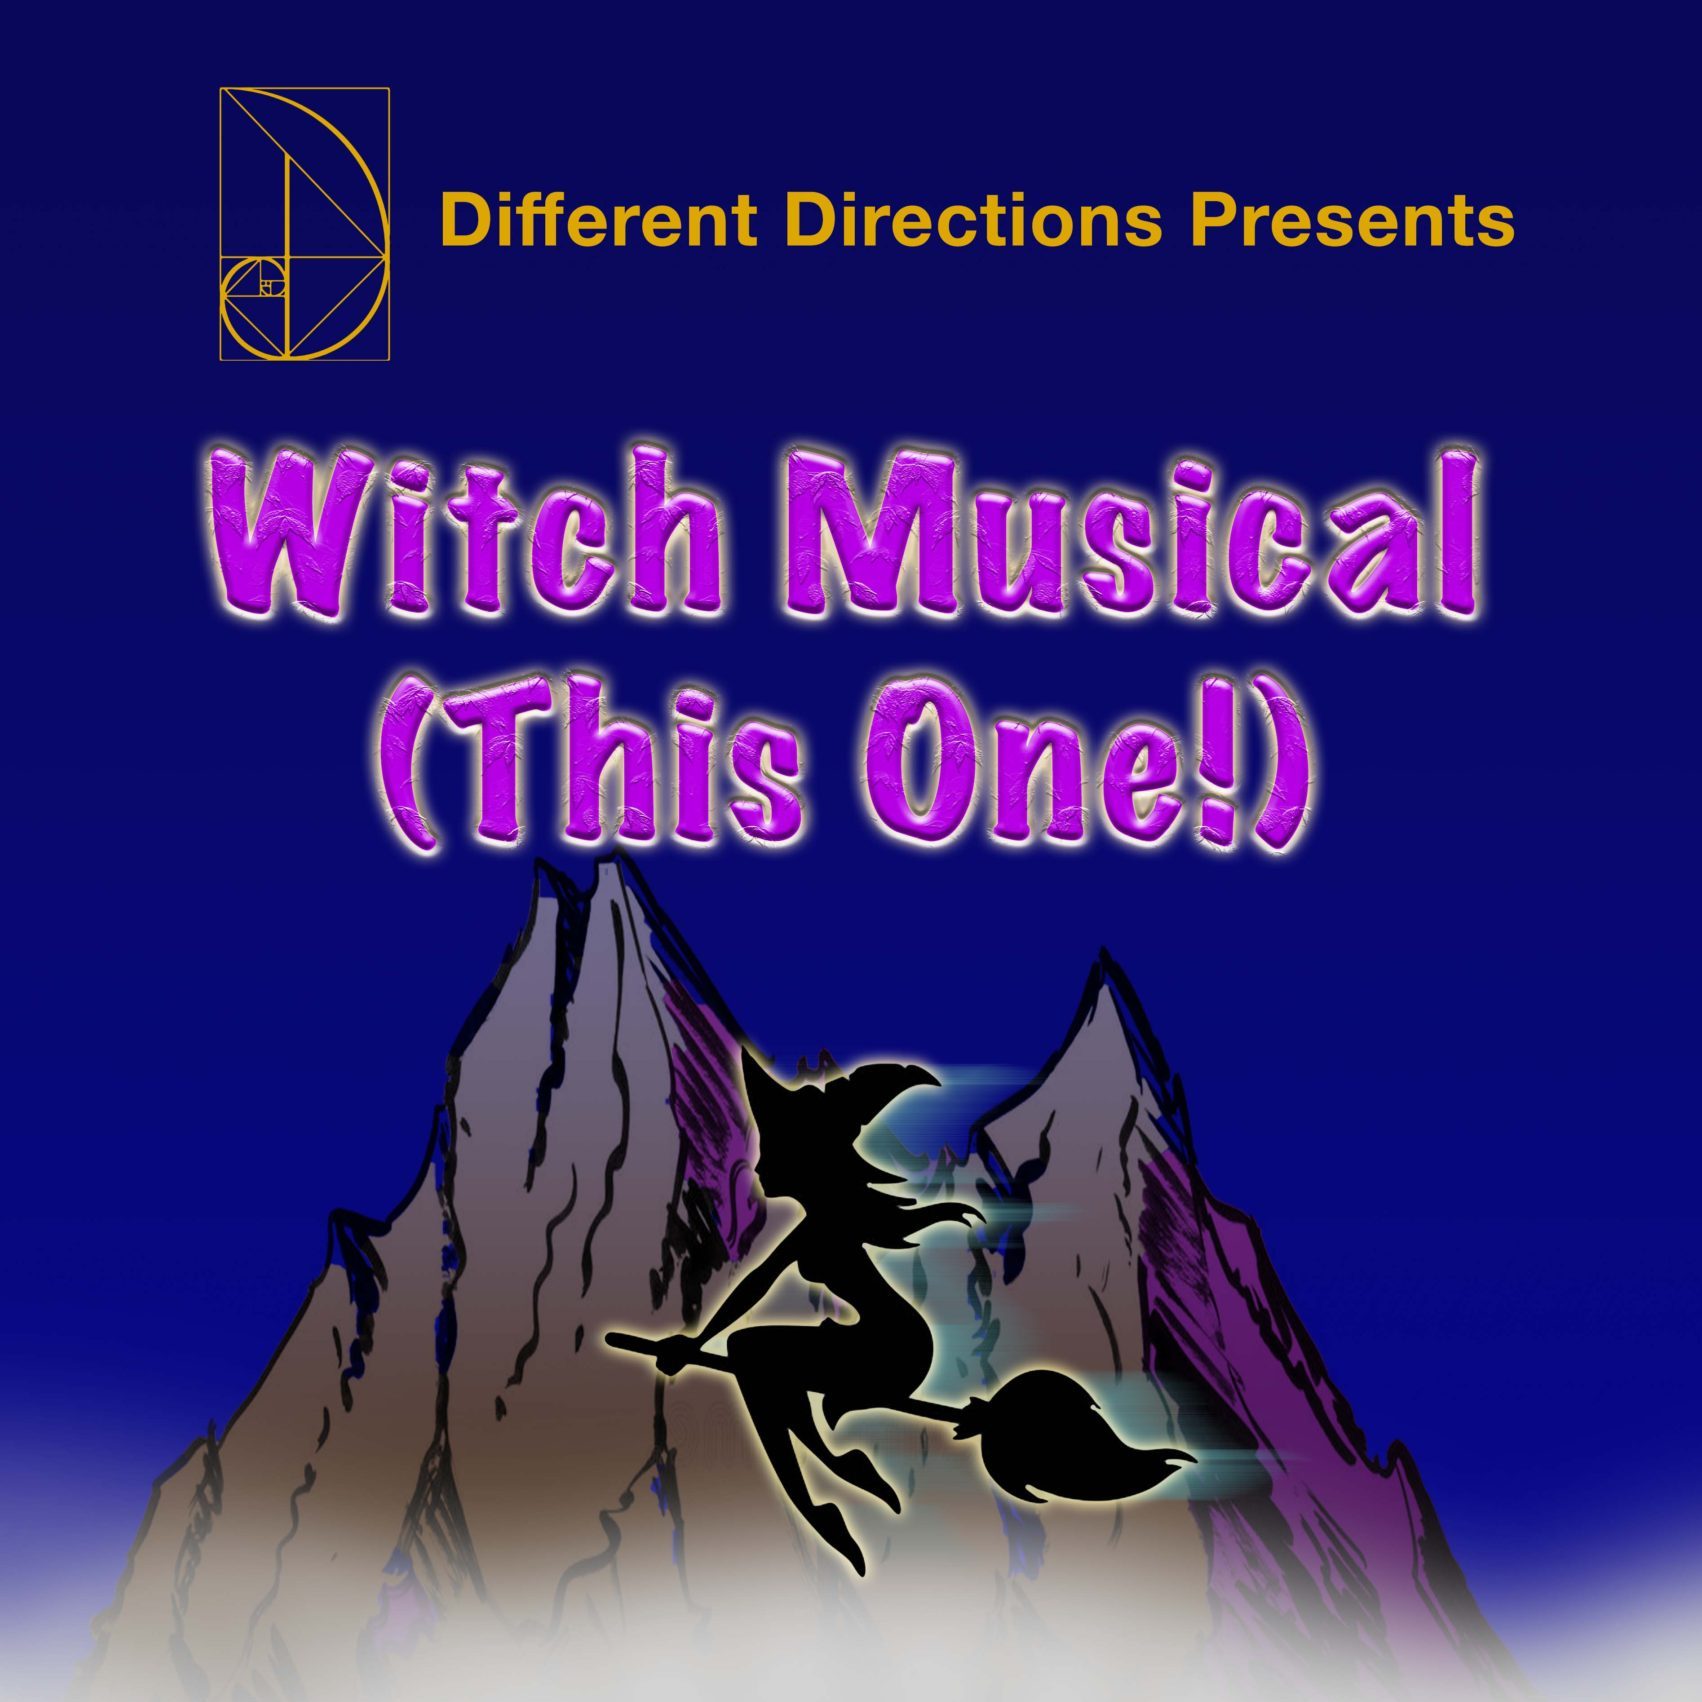 Omar was thrilled to premiere his original musical "Witch Musical (This One!)" co-written with Mary Albert December of 2021 at the Chain Theatre with Different Directions.